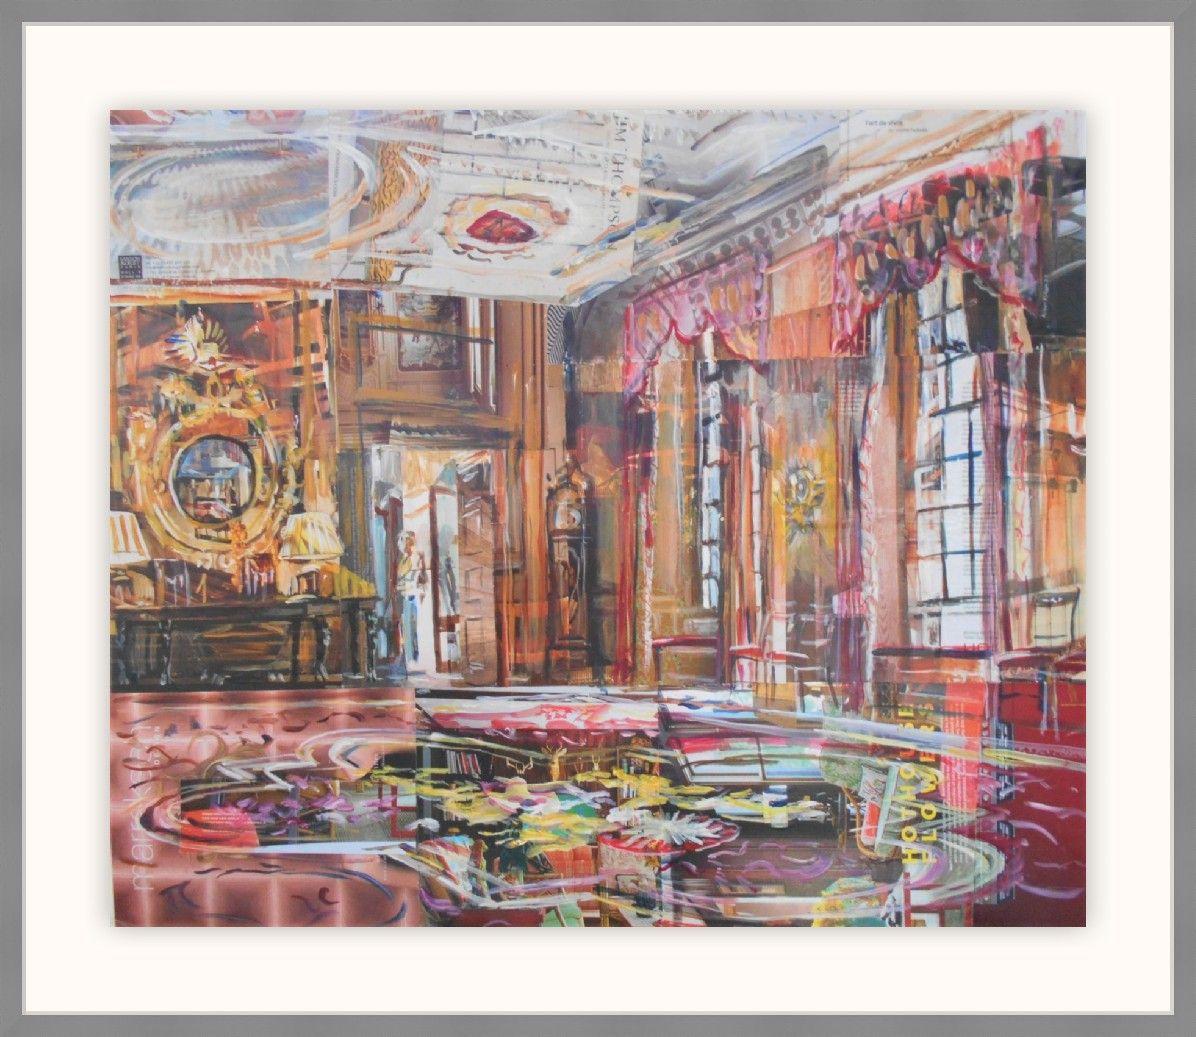 Merchant Taylor’s Hall, Parlour (grandfather clock) by Alison Pullen